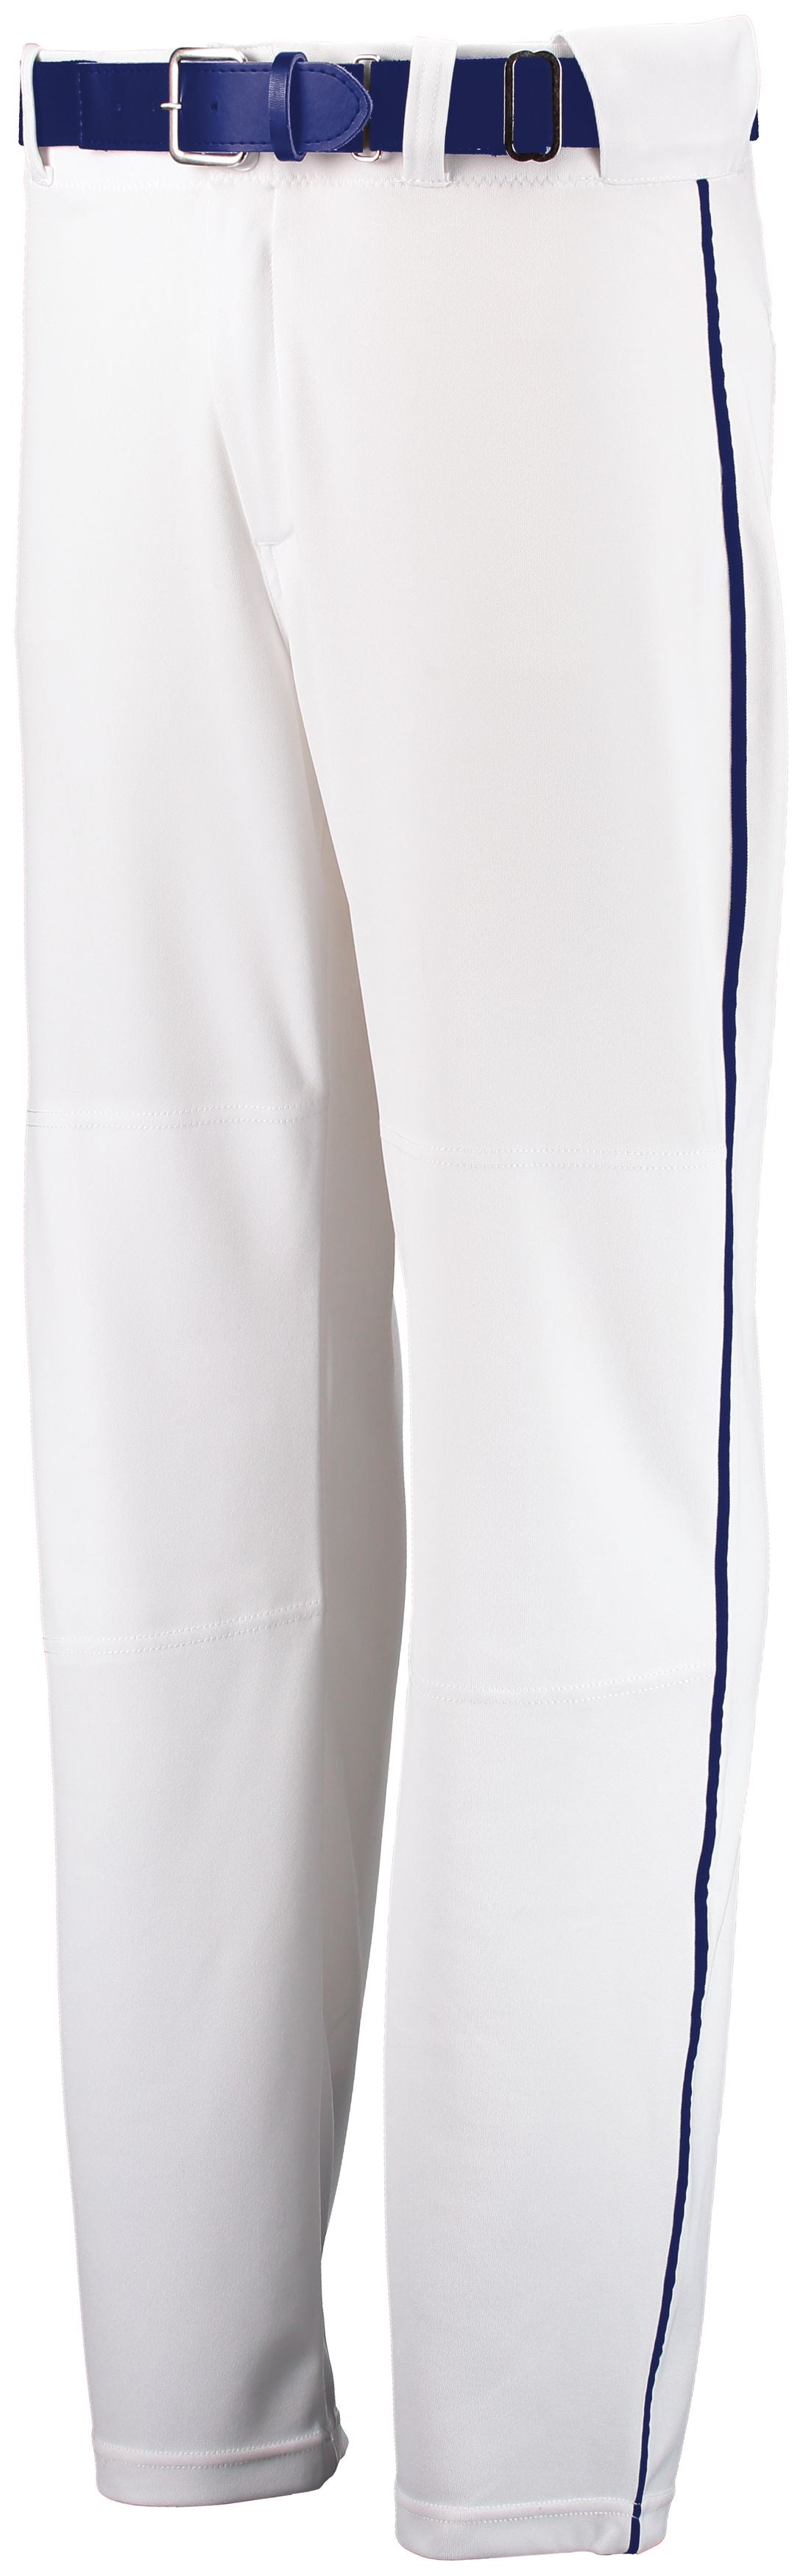 Russell Athletic Open Bottom Piped Pant in White/Royal  -Part of the Adult, Adult-Pants, Pants, Baseball, Russell-Athletic-Products, All-Sports, All-Sports-1 product lines at KanaleyCreations.com